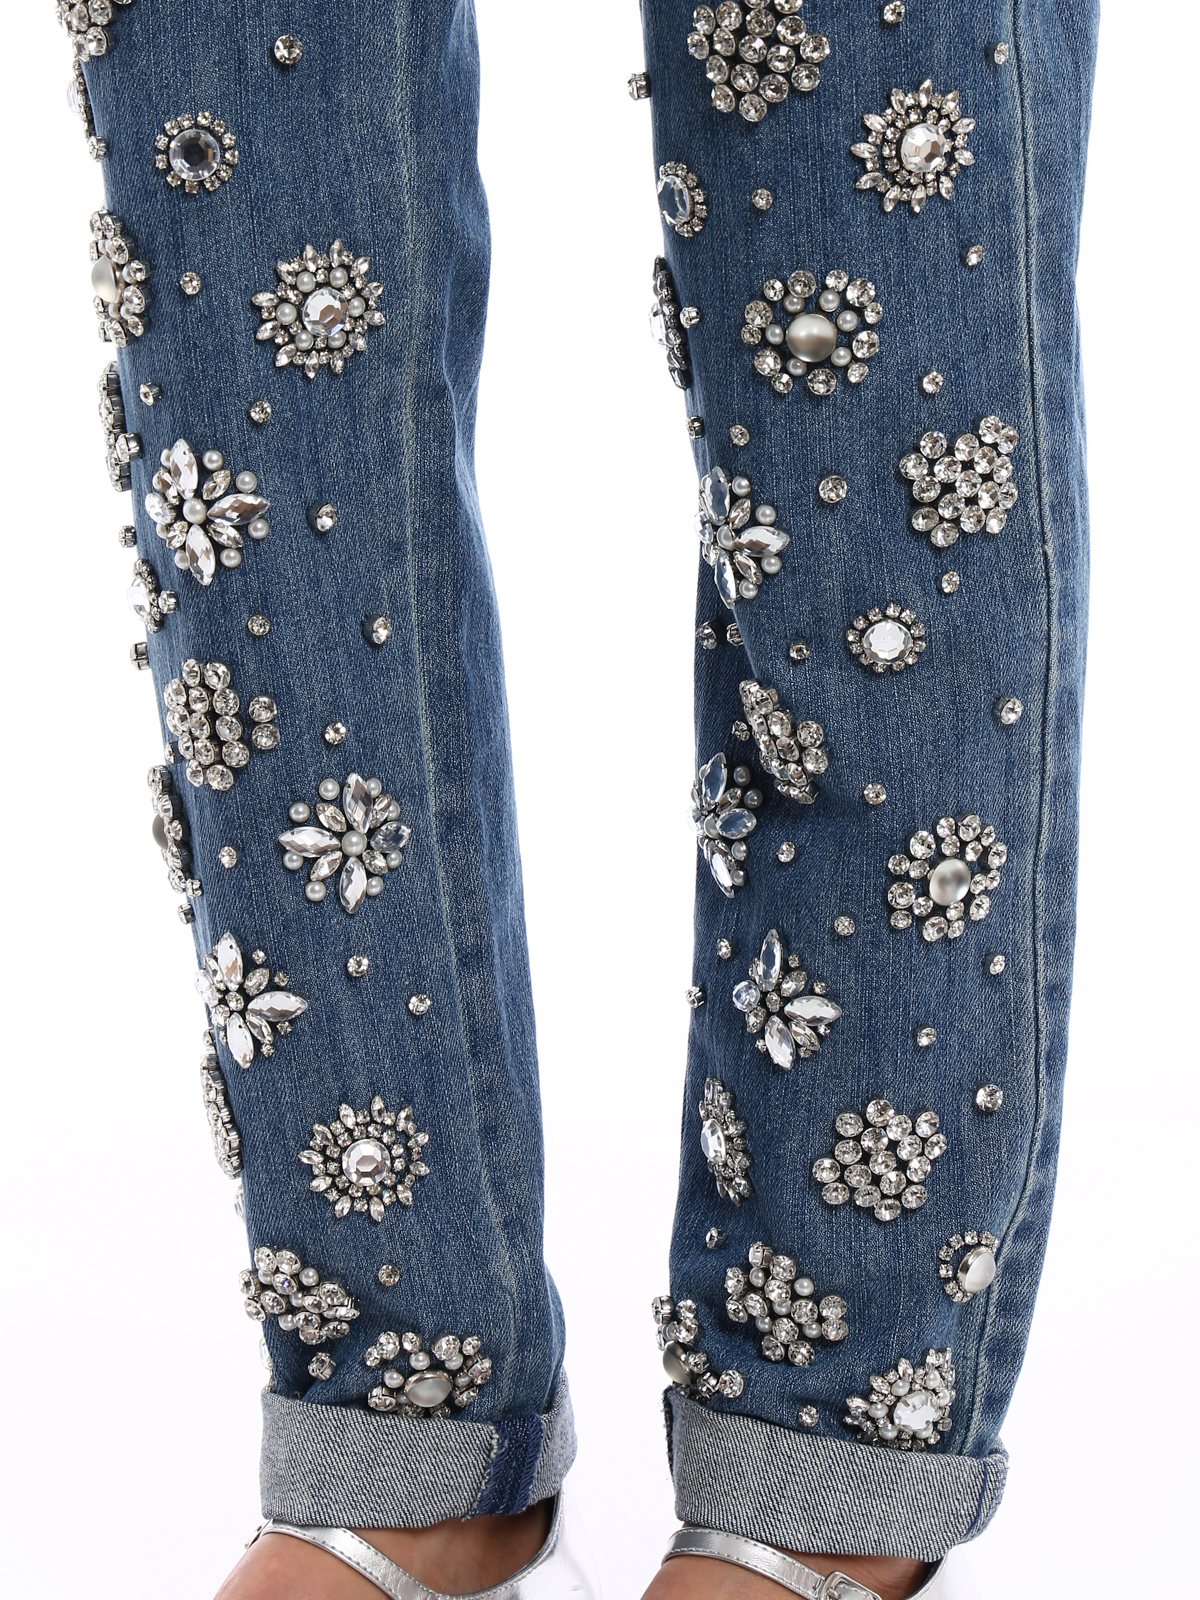 michael kors embroidered jeans